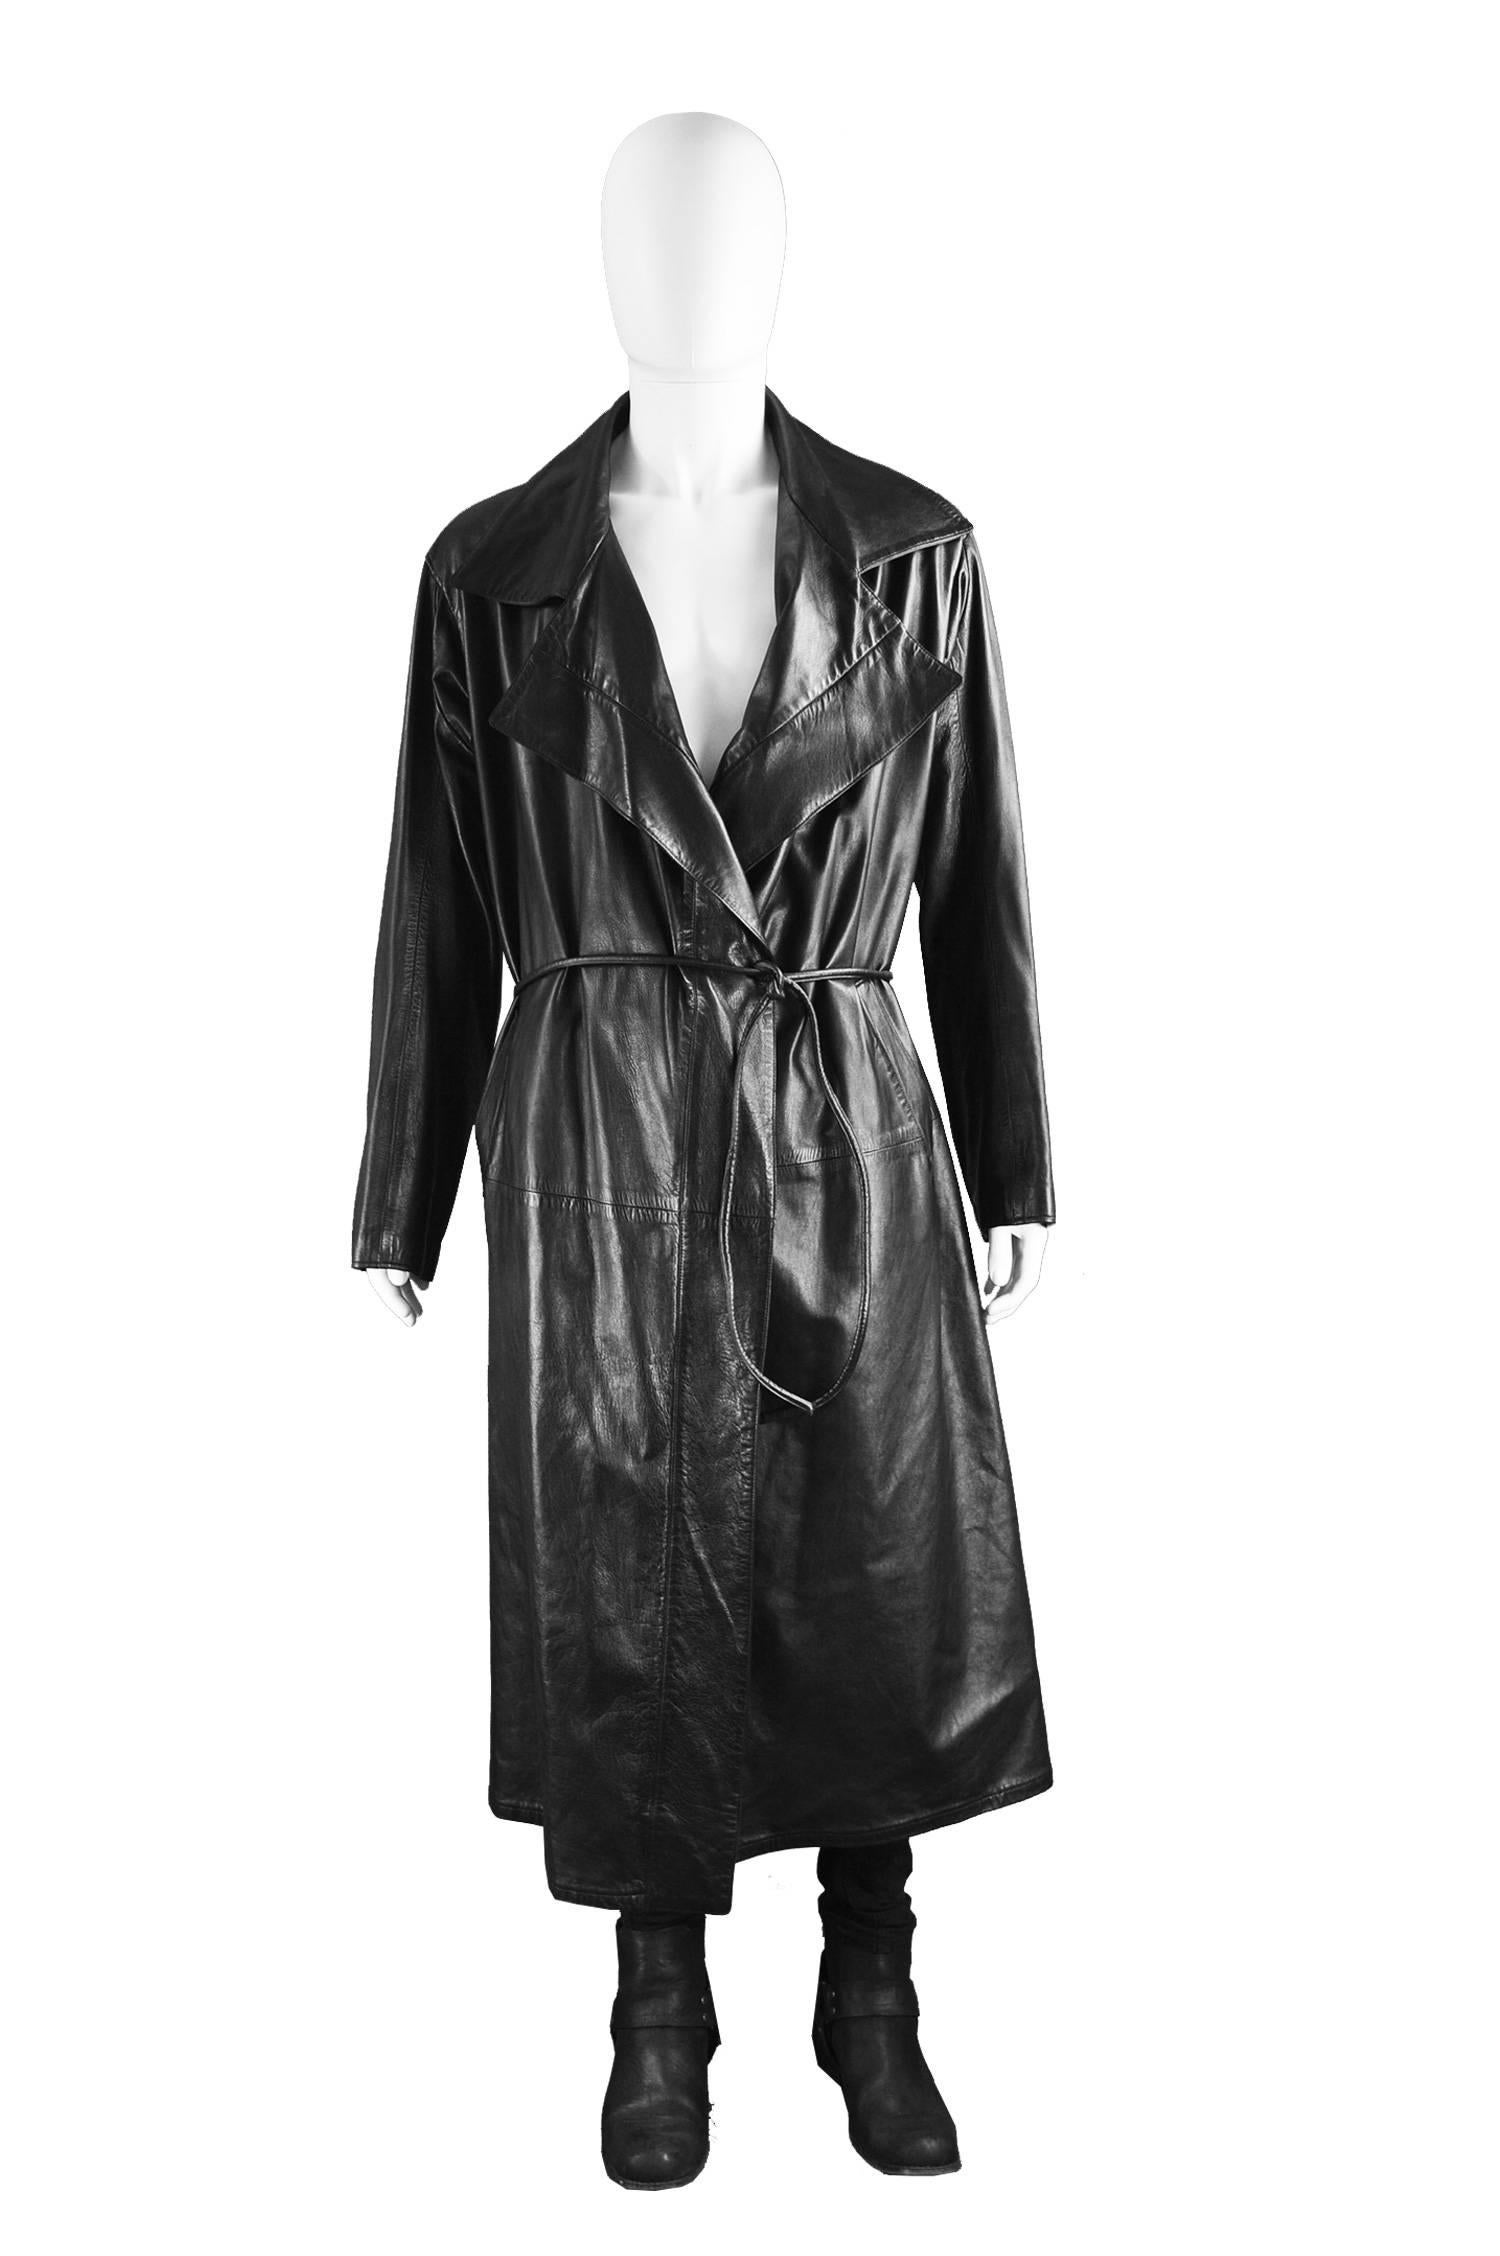 Gianni Versace Men's Black Italian Long Leather Maxi Trenchcoat, F/W 1998

Estimated Size: Men's Large to XL but this gives an intended loose, oversized fit. please check measurements. 
Chest - Up to 50” / 127cm
Waist - Free
Length (Shoulder to Hem)